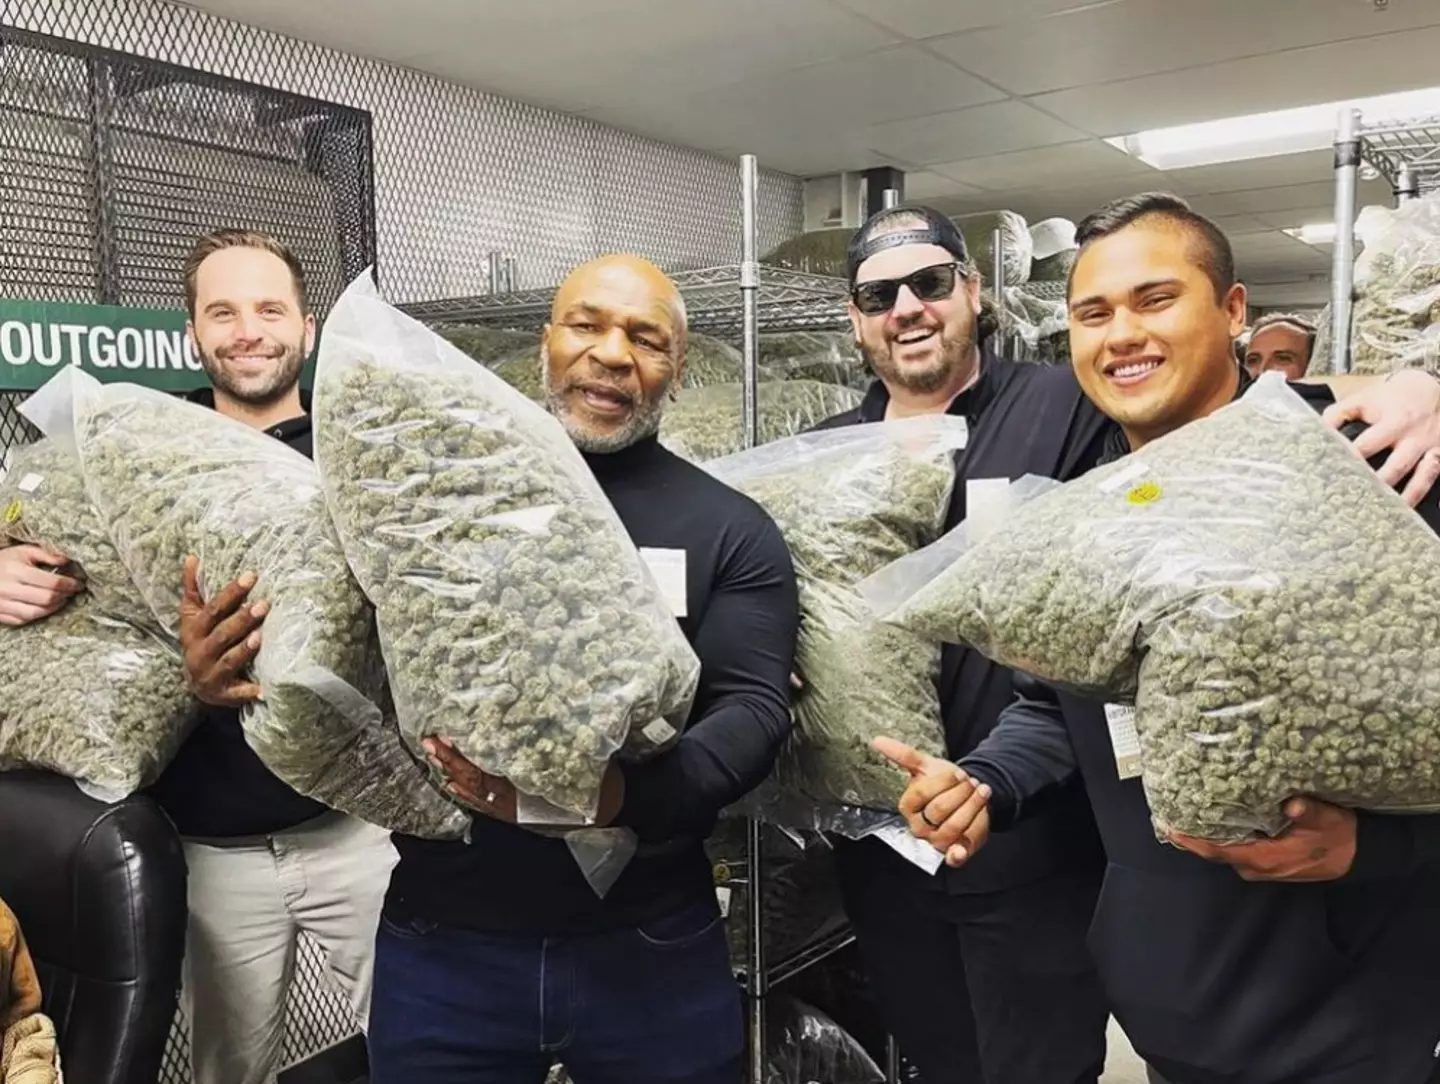 Tyson is a huge weed advocate.